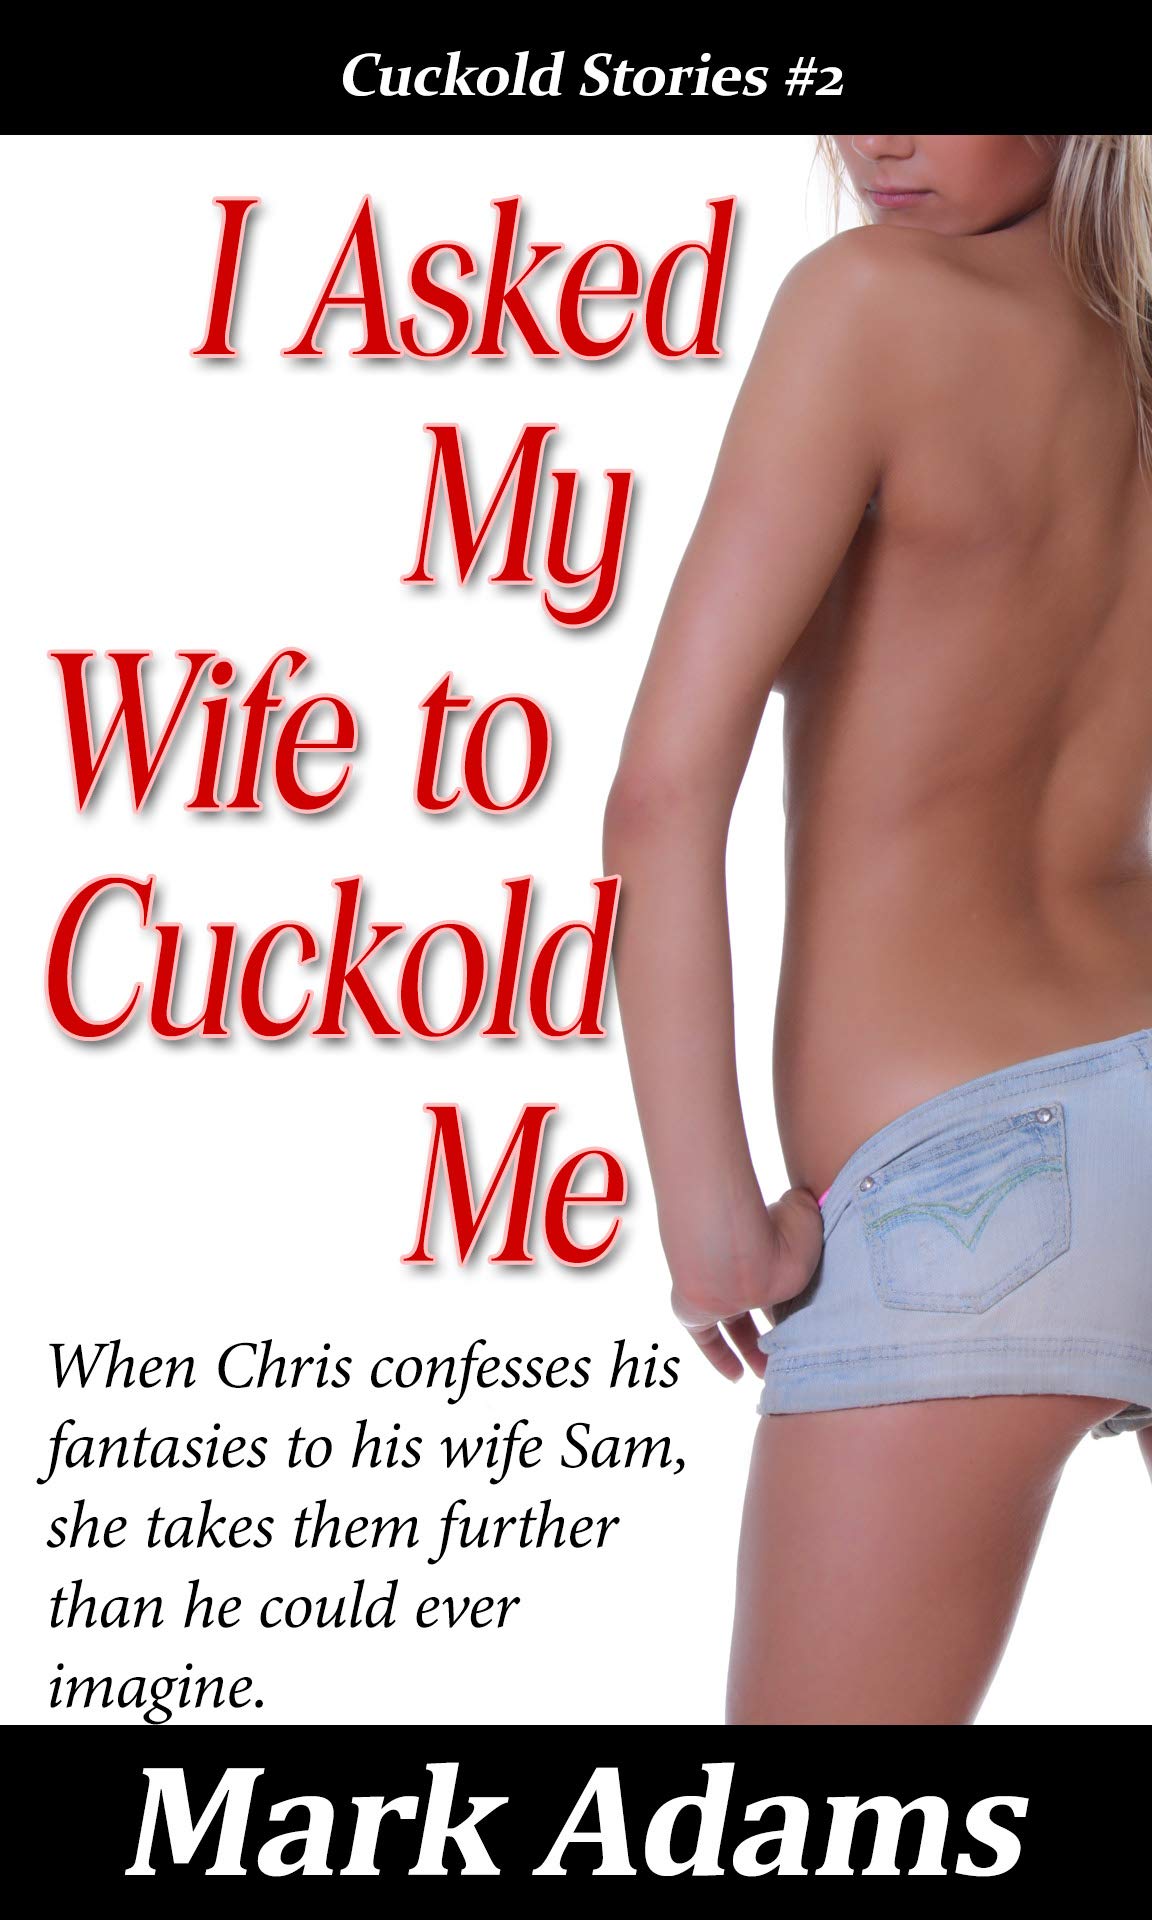 chris heiler recommends I Want My Wife To Cuckold Me